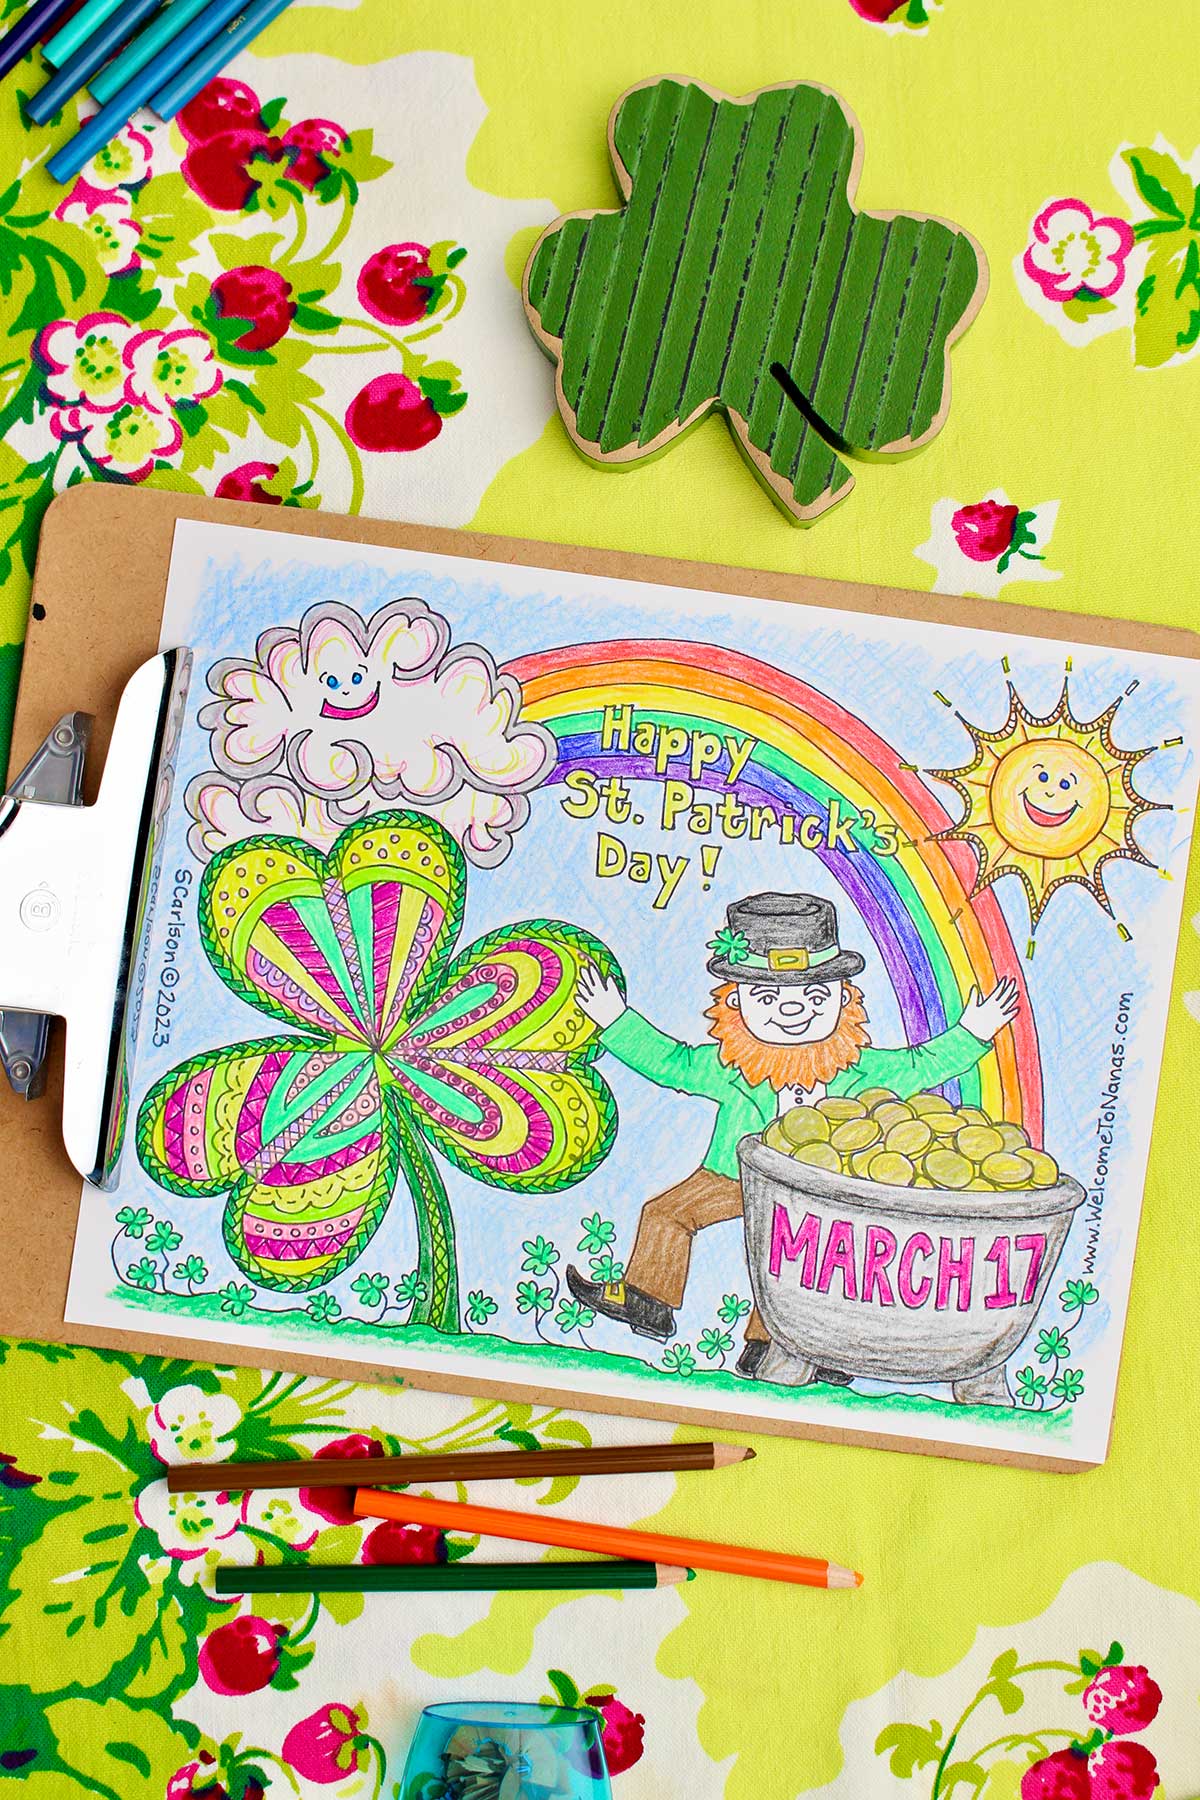 Completed St. Patrick's Day coloring page on clipboard sitting on a green table cloth with strawberries on it with a wooden shamrock and colored pencils near by.